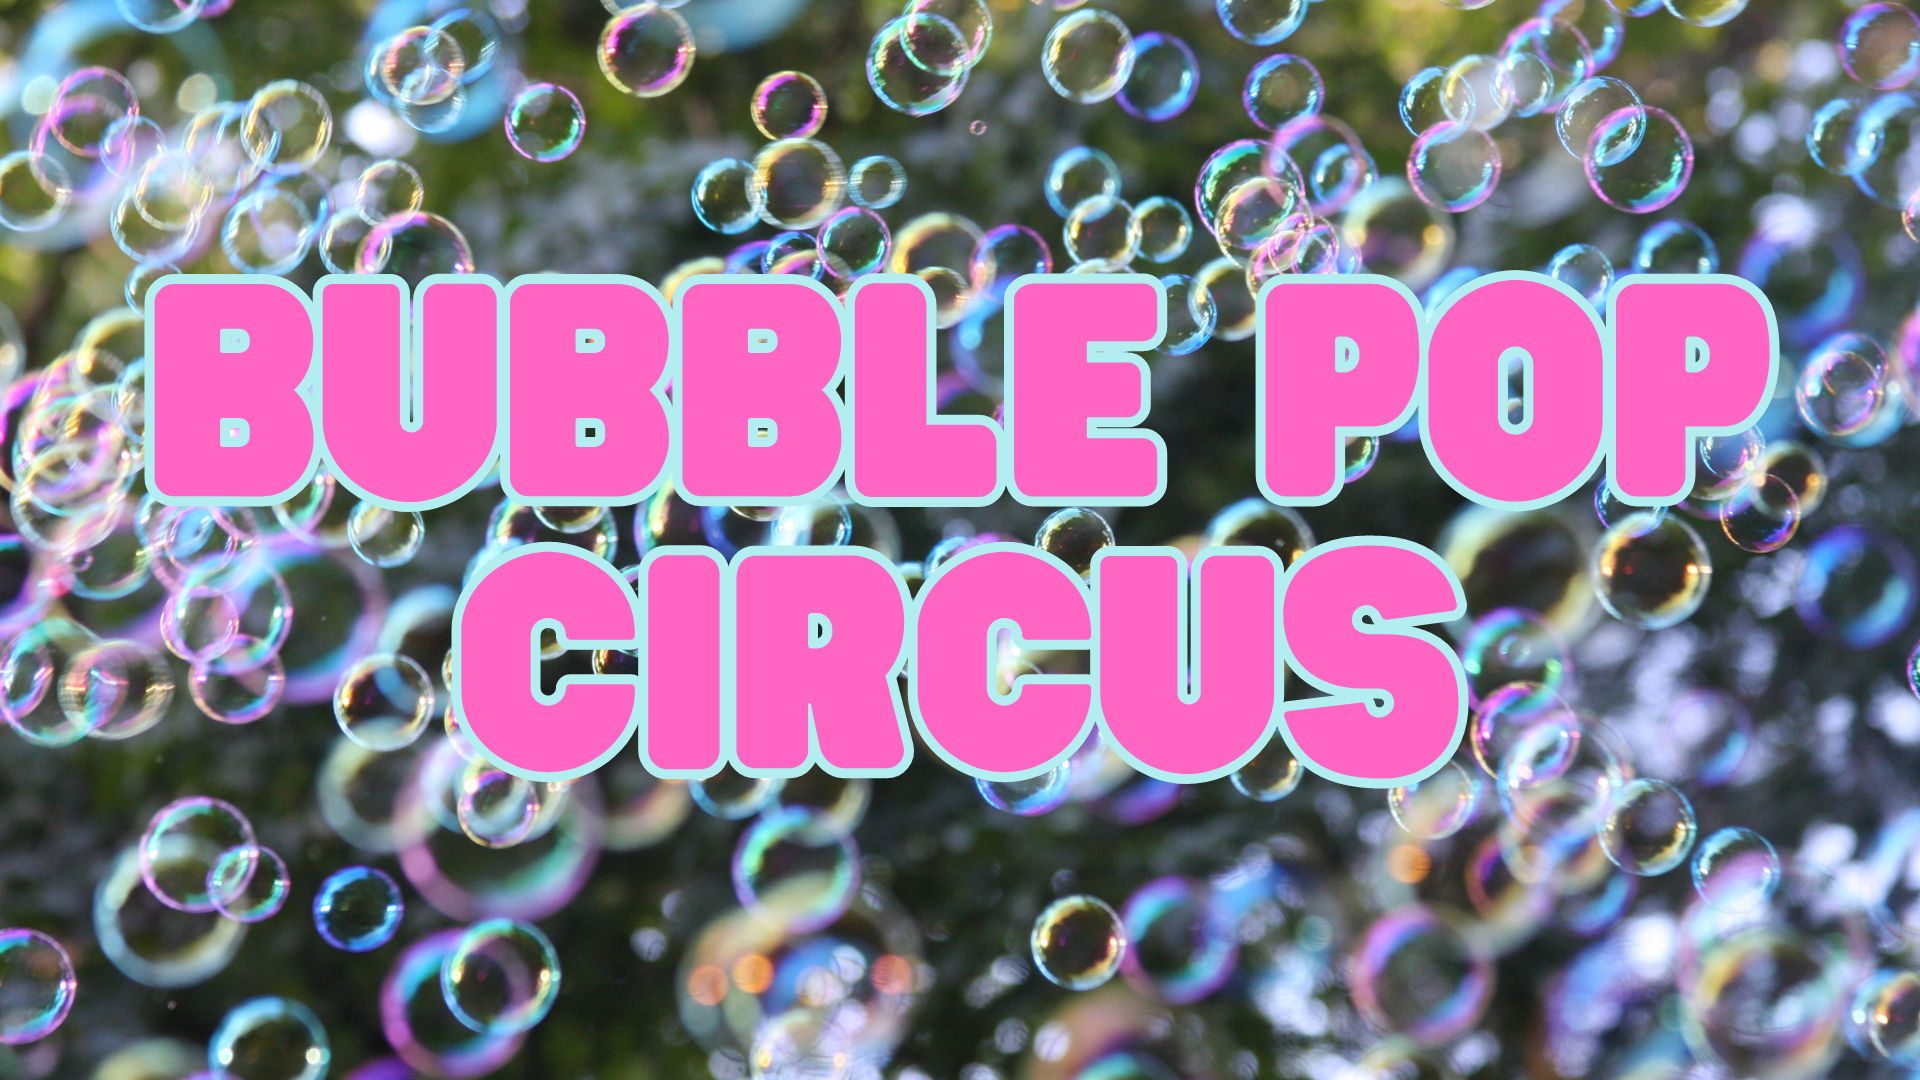 Bubble Pop Circus at The Majestic